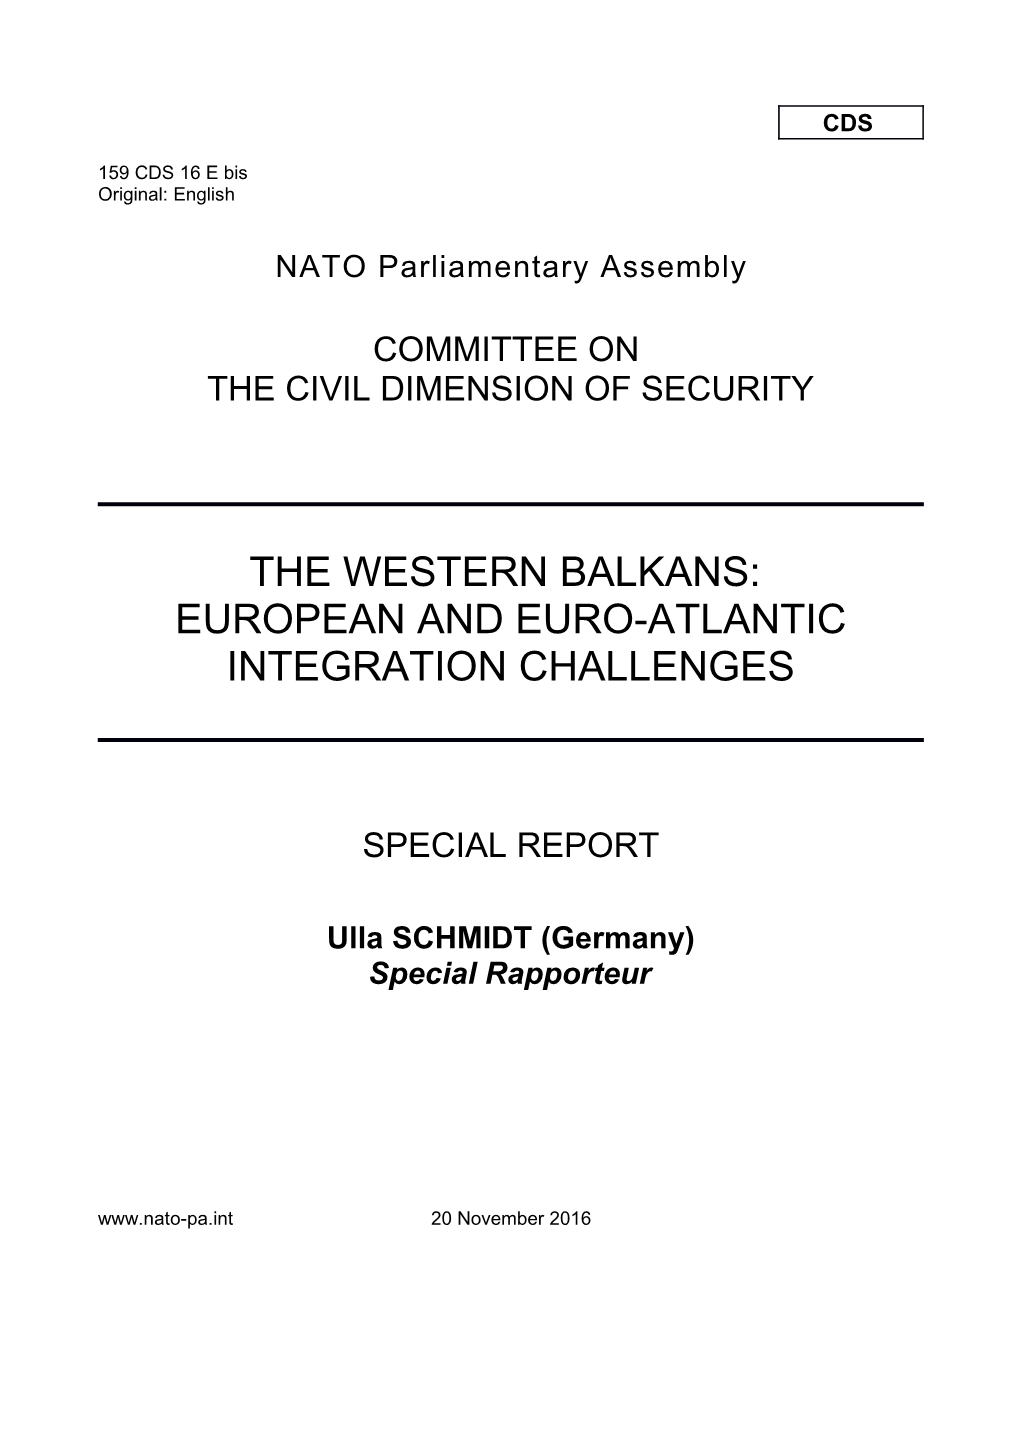 159 CDS 16 E - Special Report on Western Balkans